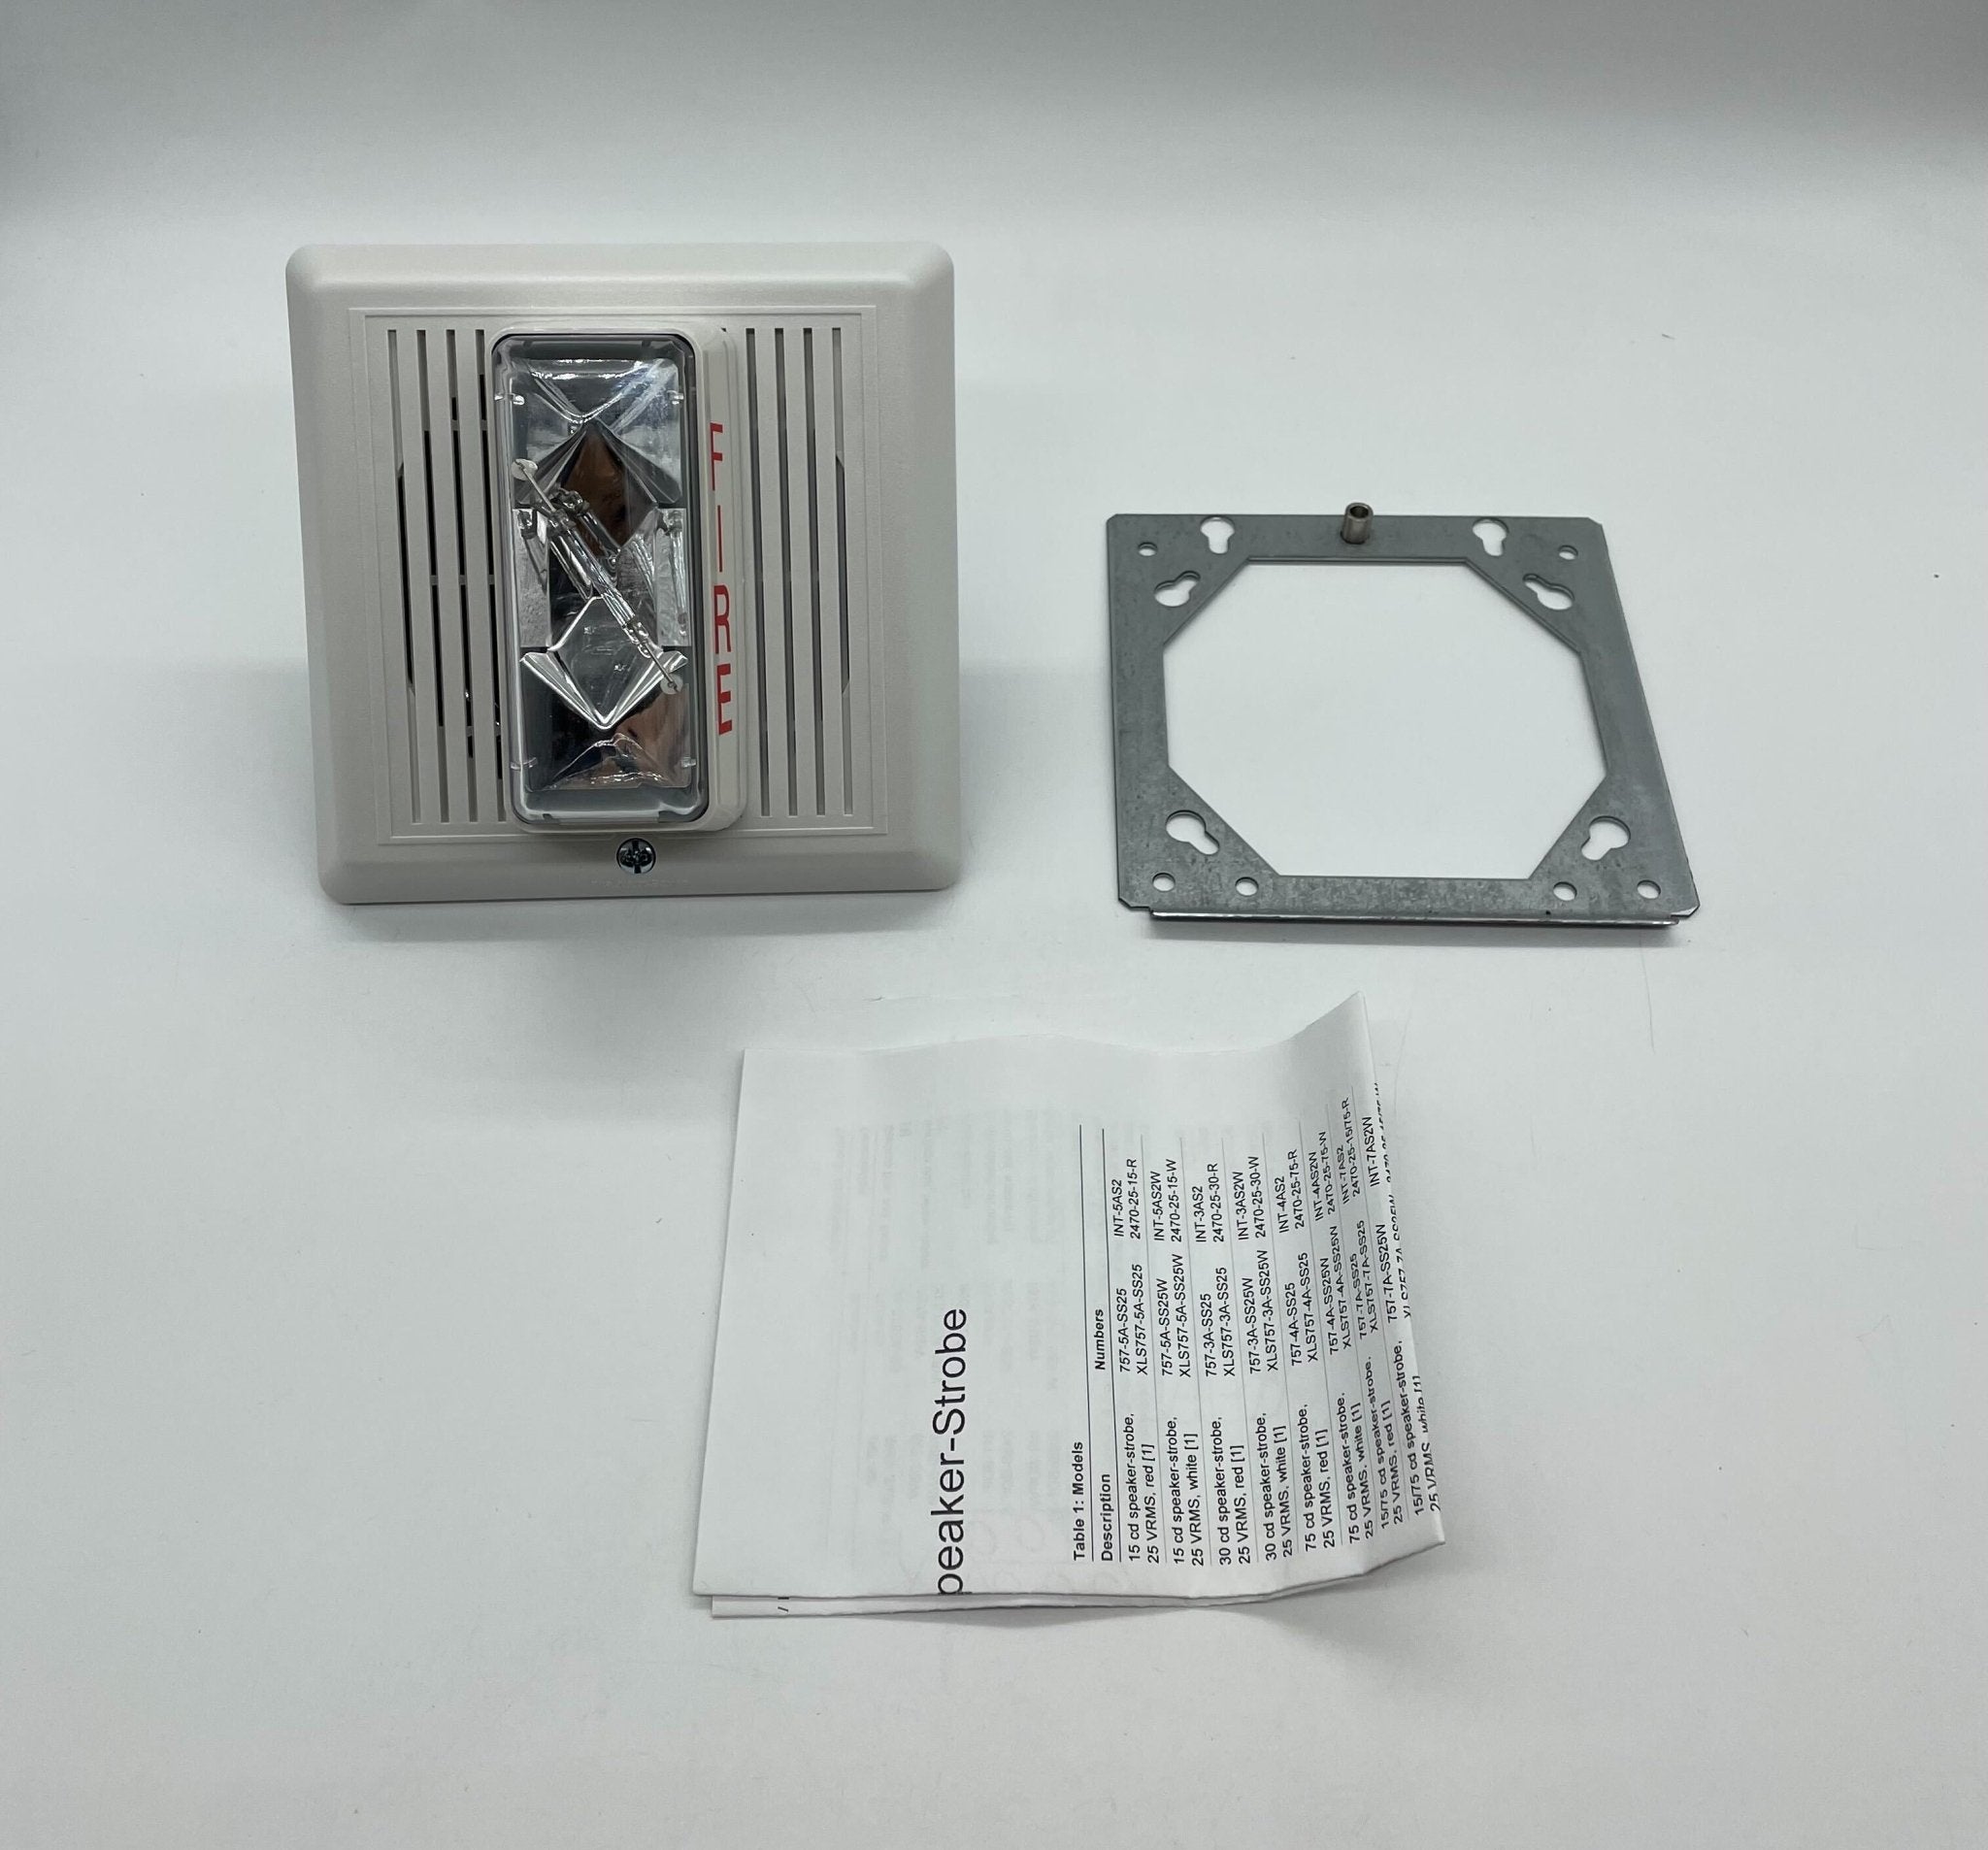 Edwards 757-7A-SS70W - The Fire Alarm Supplier